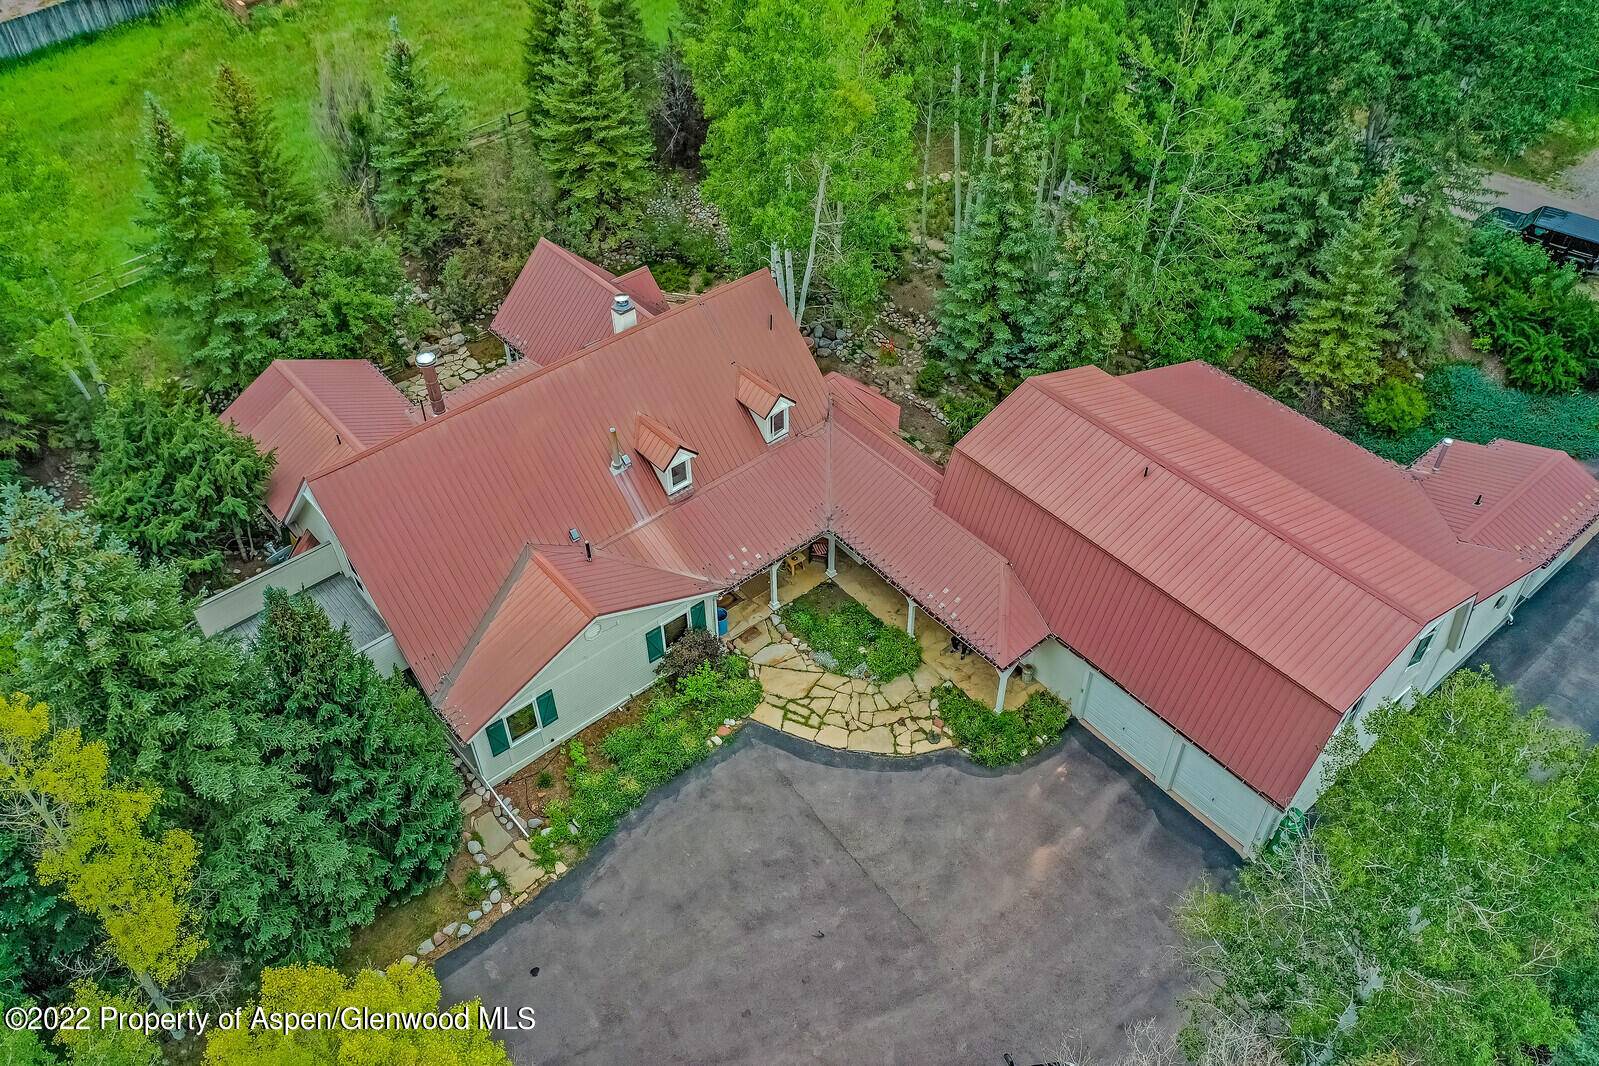 Don't miss this opportunity to own a beautiful horse property in Old Snowmass.